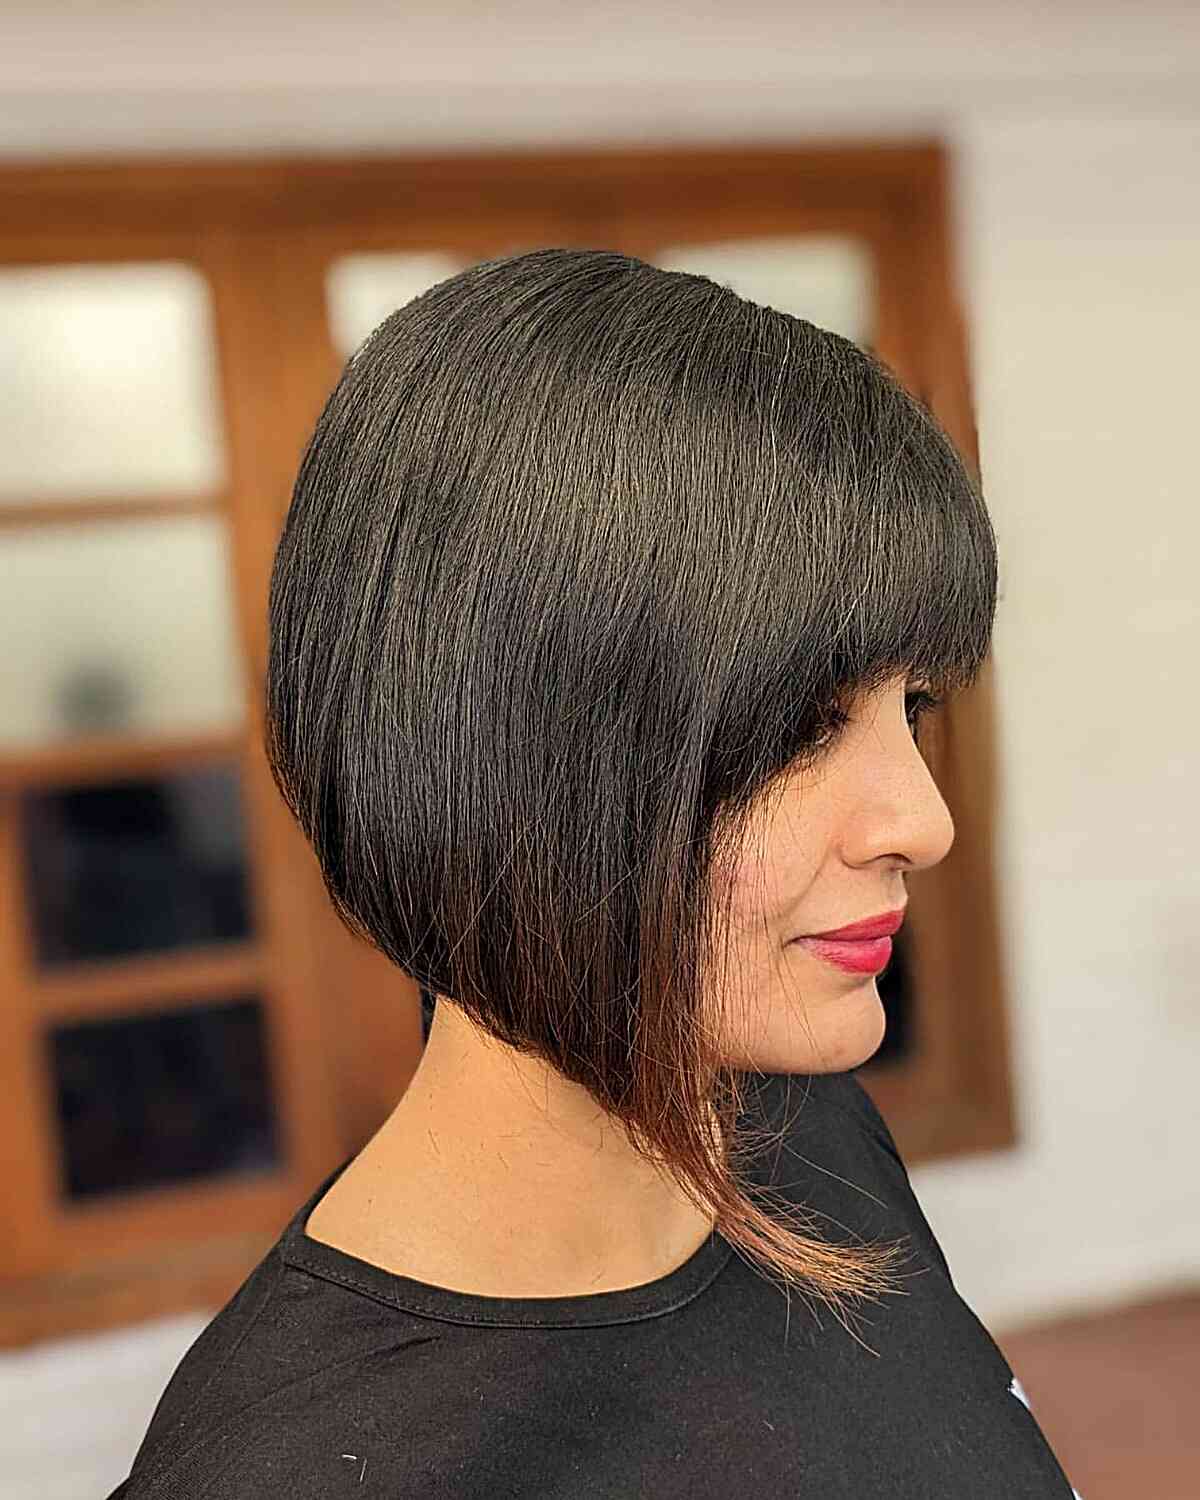 The Classic Bob with Bangs Style for ladies with short straight hair